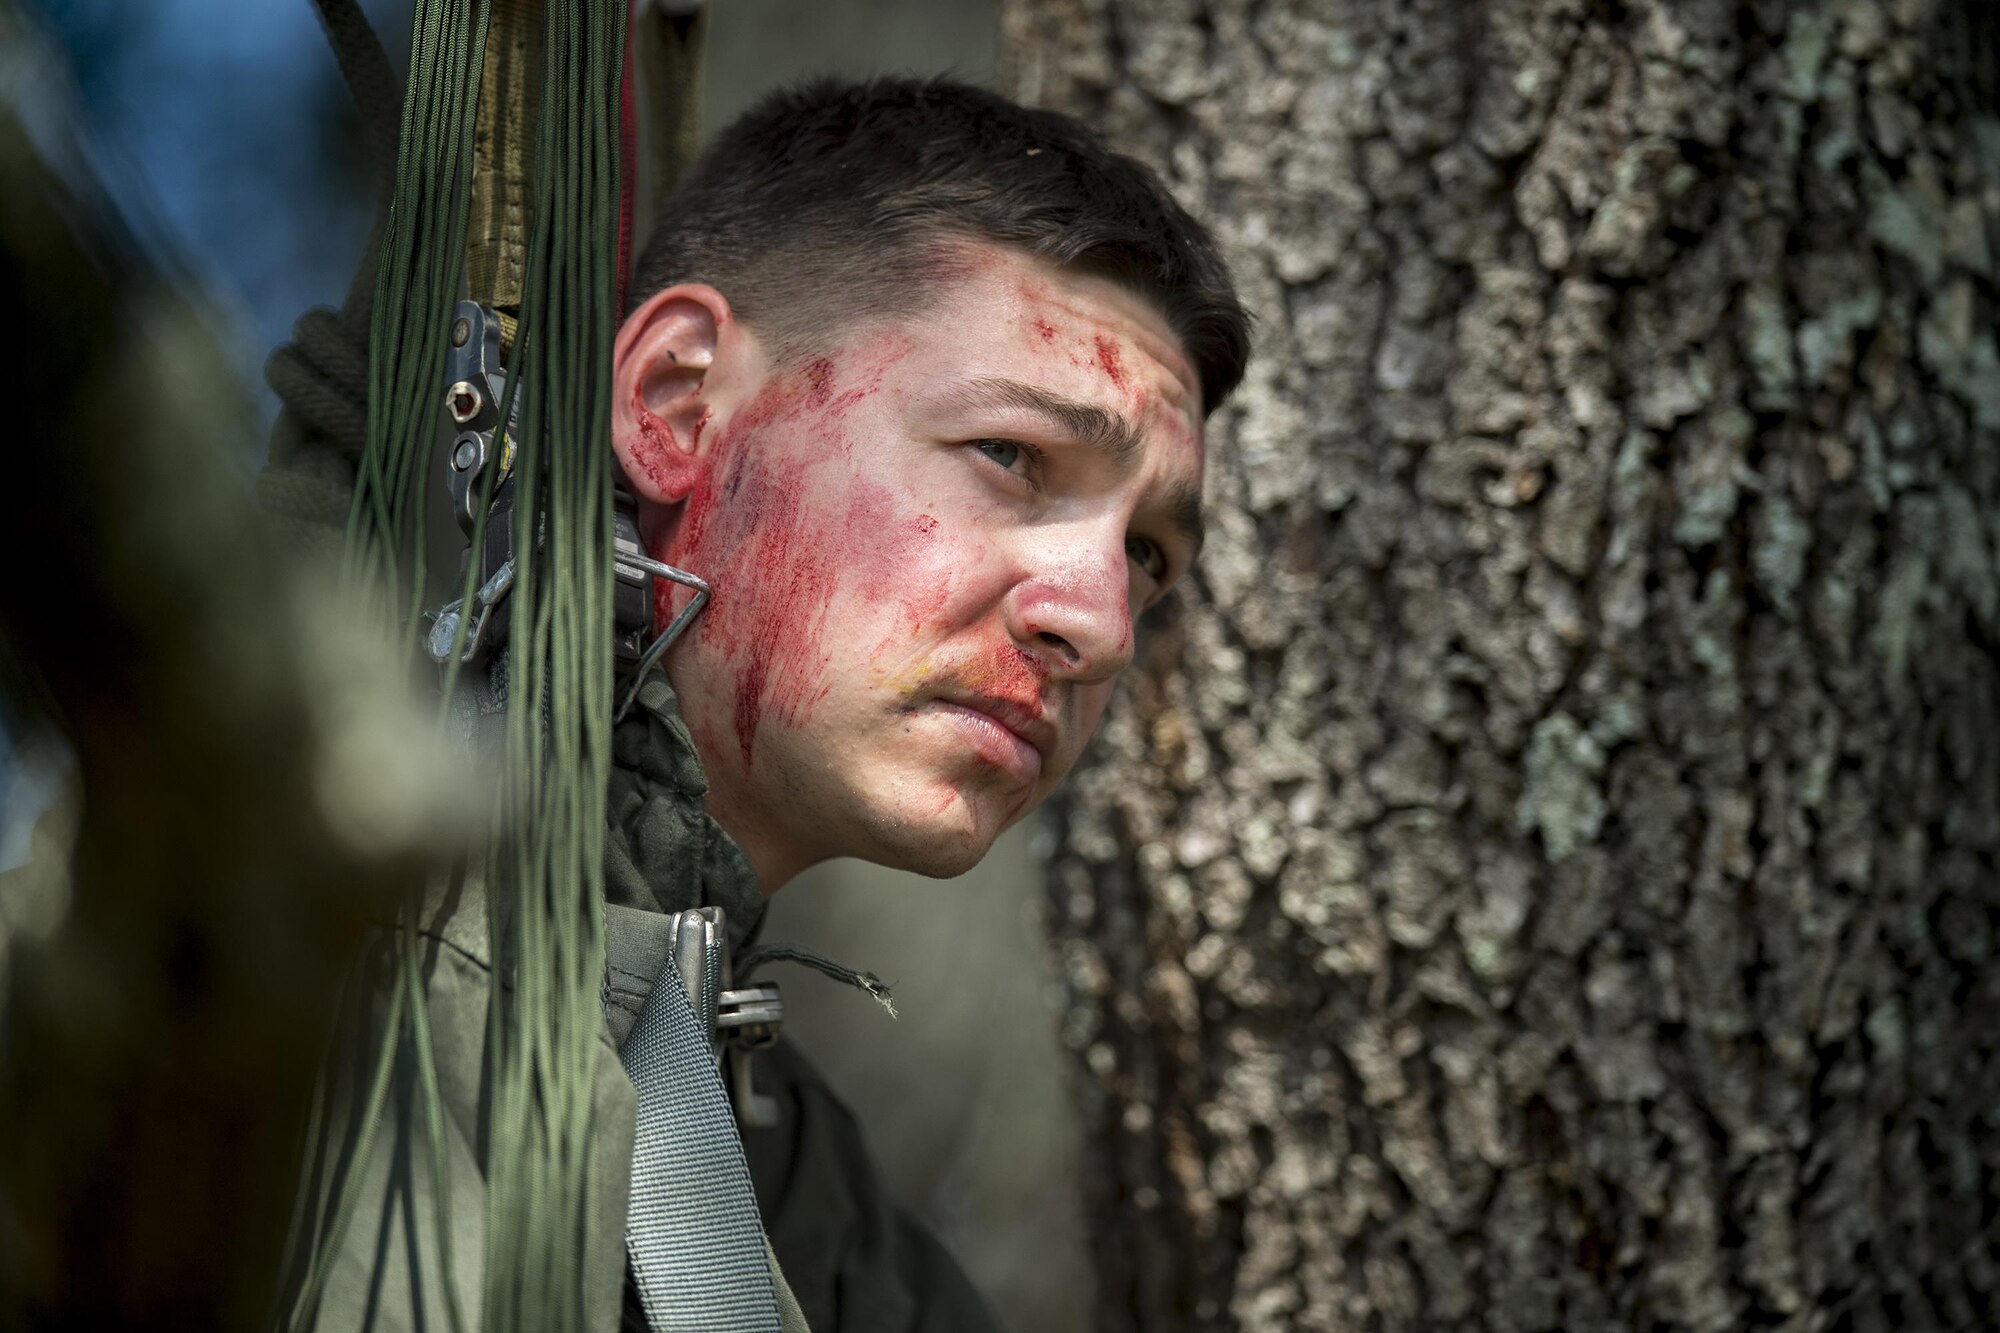 Senior Airman Joshua Barich, 337th Air Control Squadron weapons technician, hangs in a tree to simulate a rescue victim who is stuck, Nov. 2, 2016, in Marianna, Fla. Pararescuemen had to climb the tree, lower Barich down and then assess his condition as part of the rapid-rescue exercise. (U.S. Air Force photo by Tech. Sgt. Zachary Wolf)